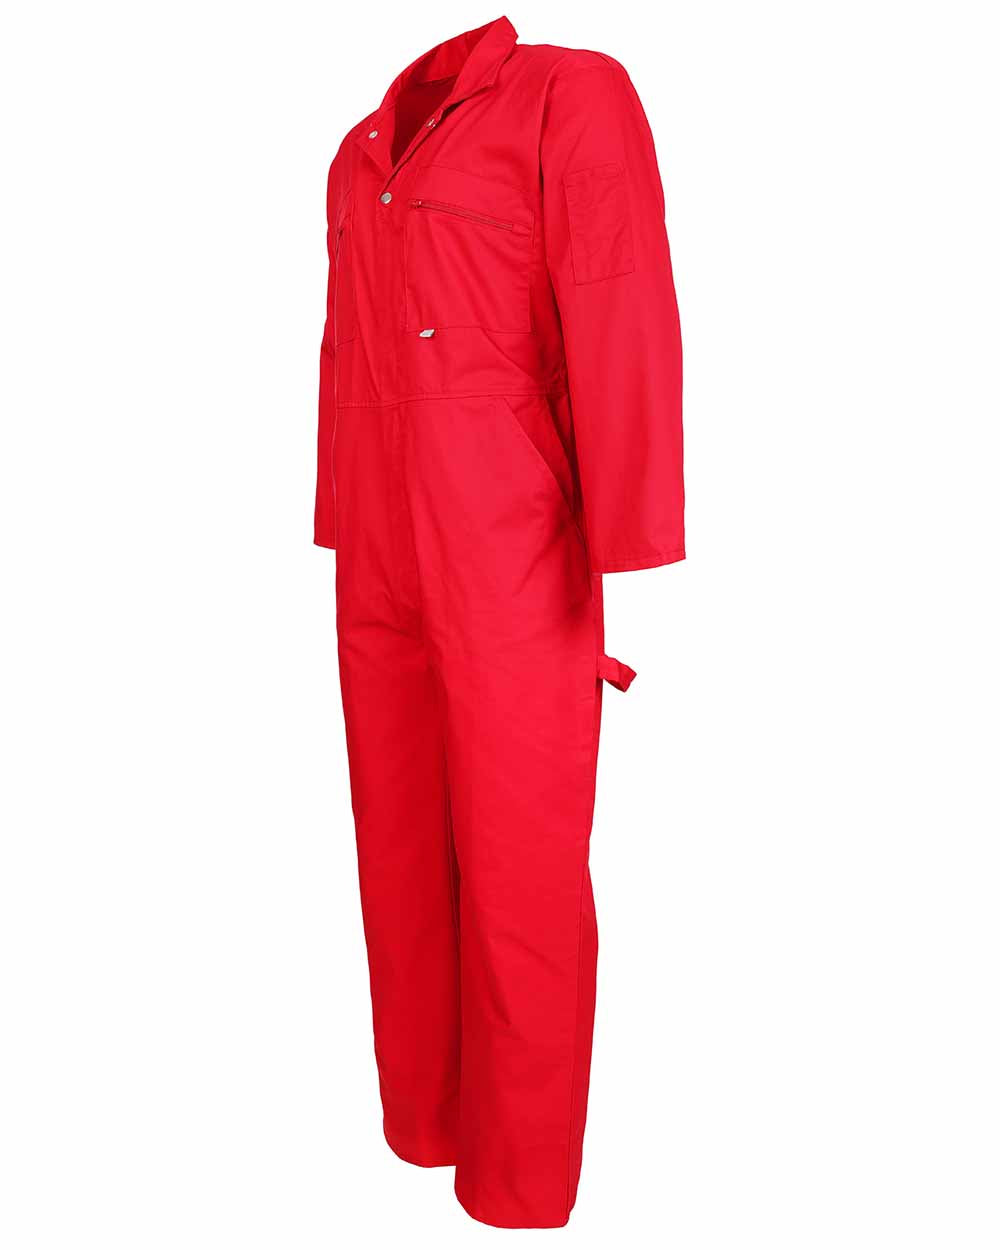 Zipped chest pocket detail on Fort Zip Front Boilersuit in Red 